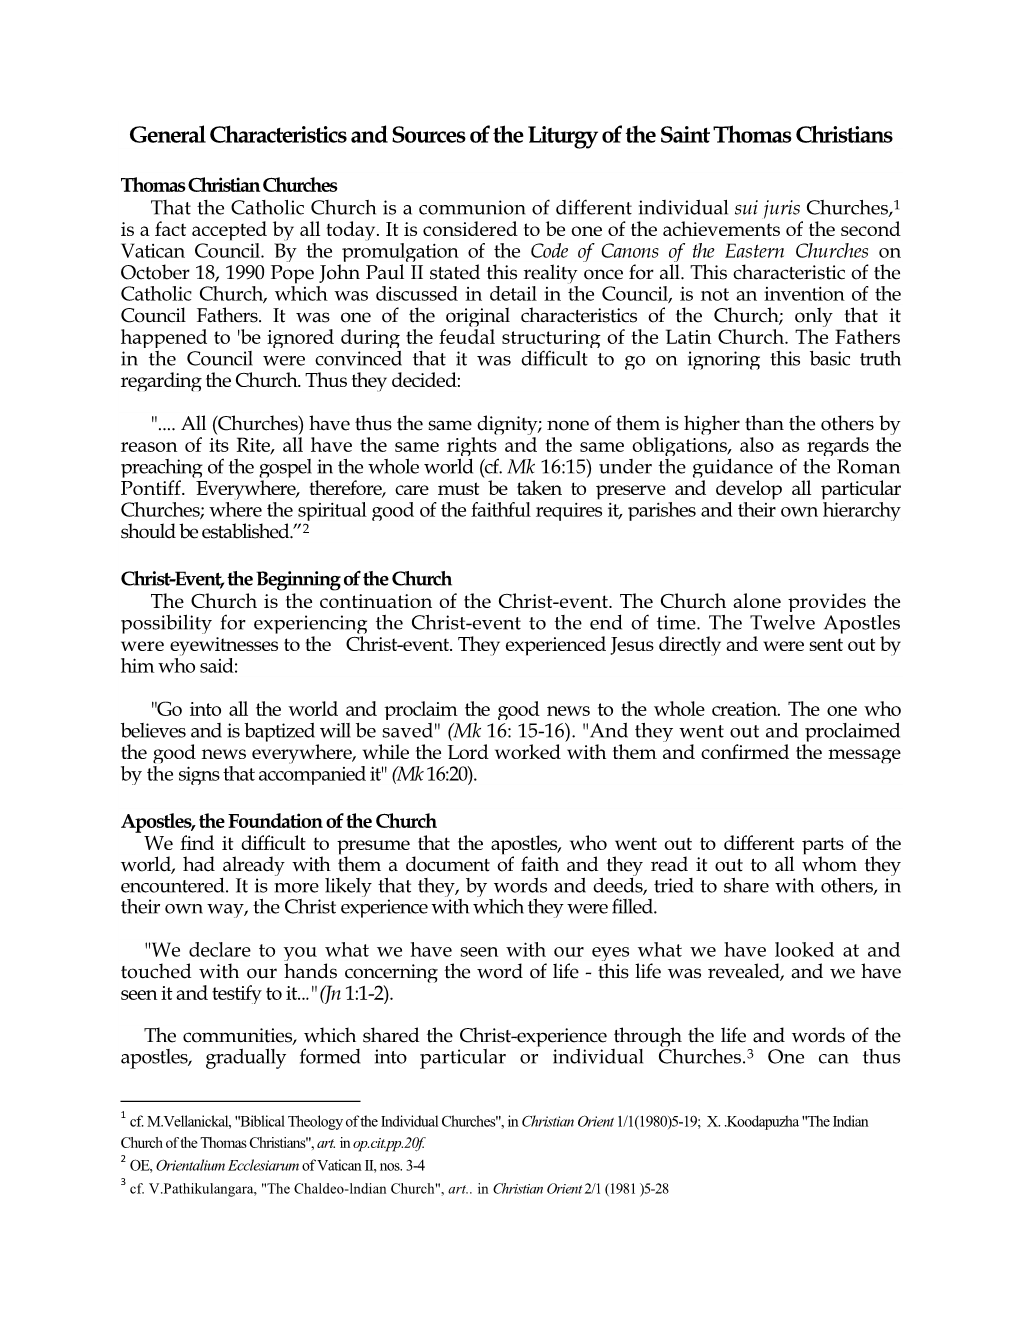 General Characteristics and Sources of the Liturgy of the Saint Thomas Christians